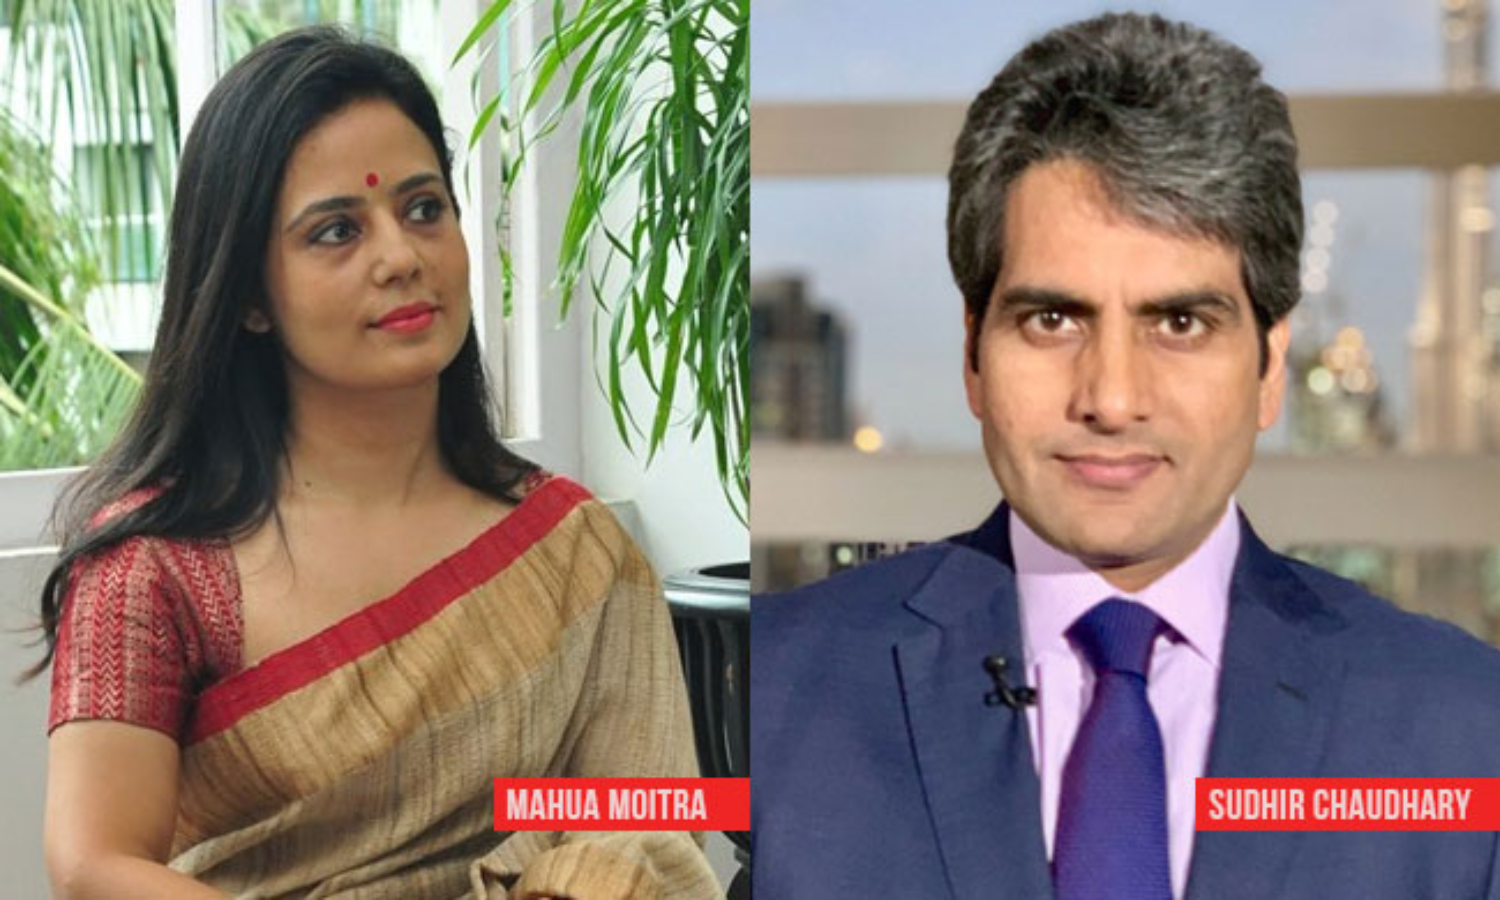 TMC MP Mahua Moitra tries to bully Zee News Editor Sudhir Chaudhary with  her parliamentary privilege